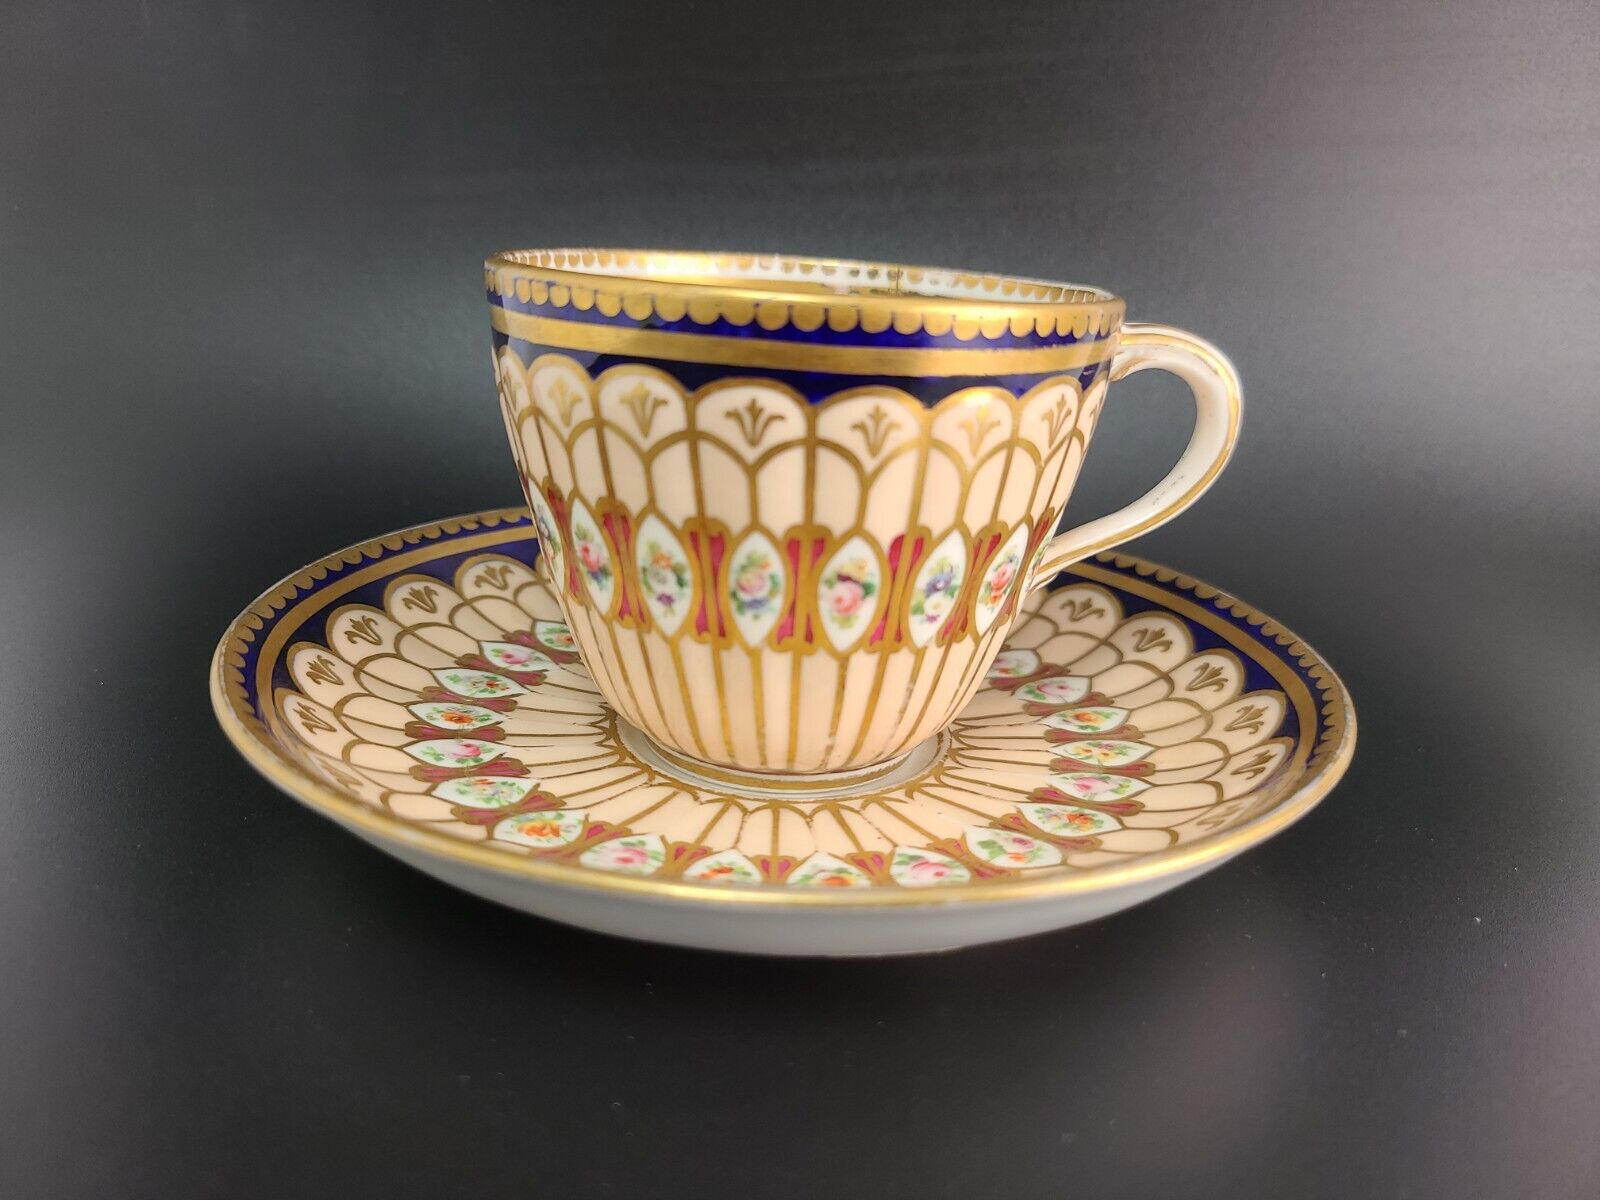 Rare 18th Century London Tea Cup And Soucer gold plated broken cup, hand Painted